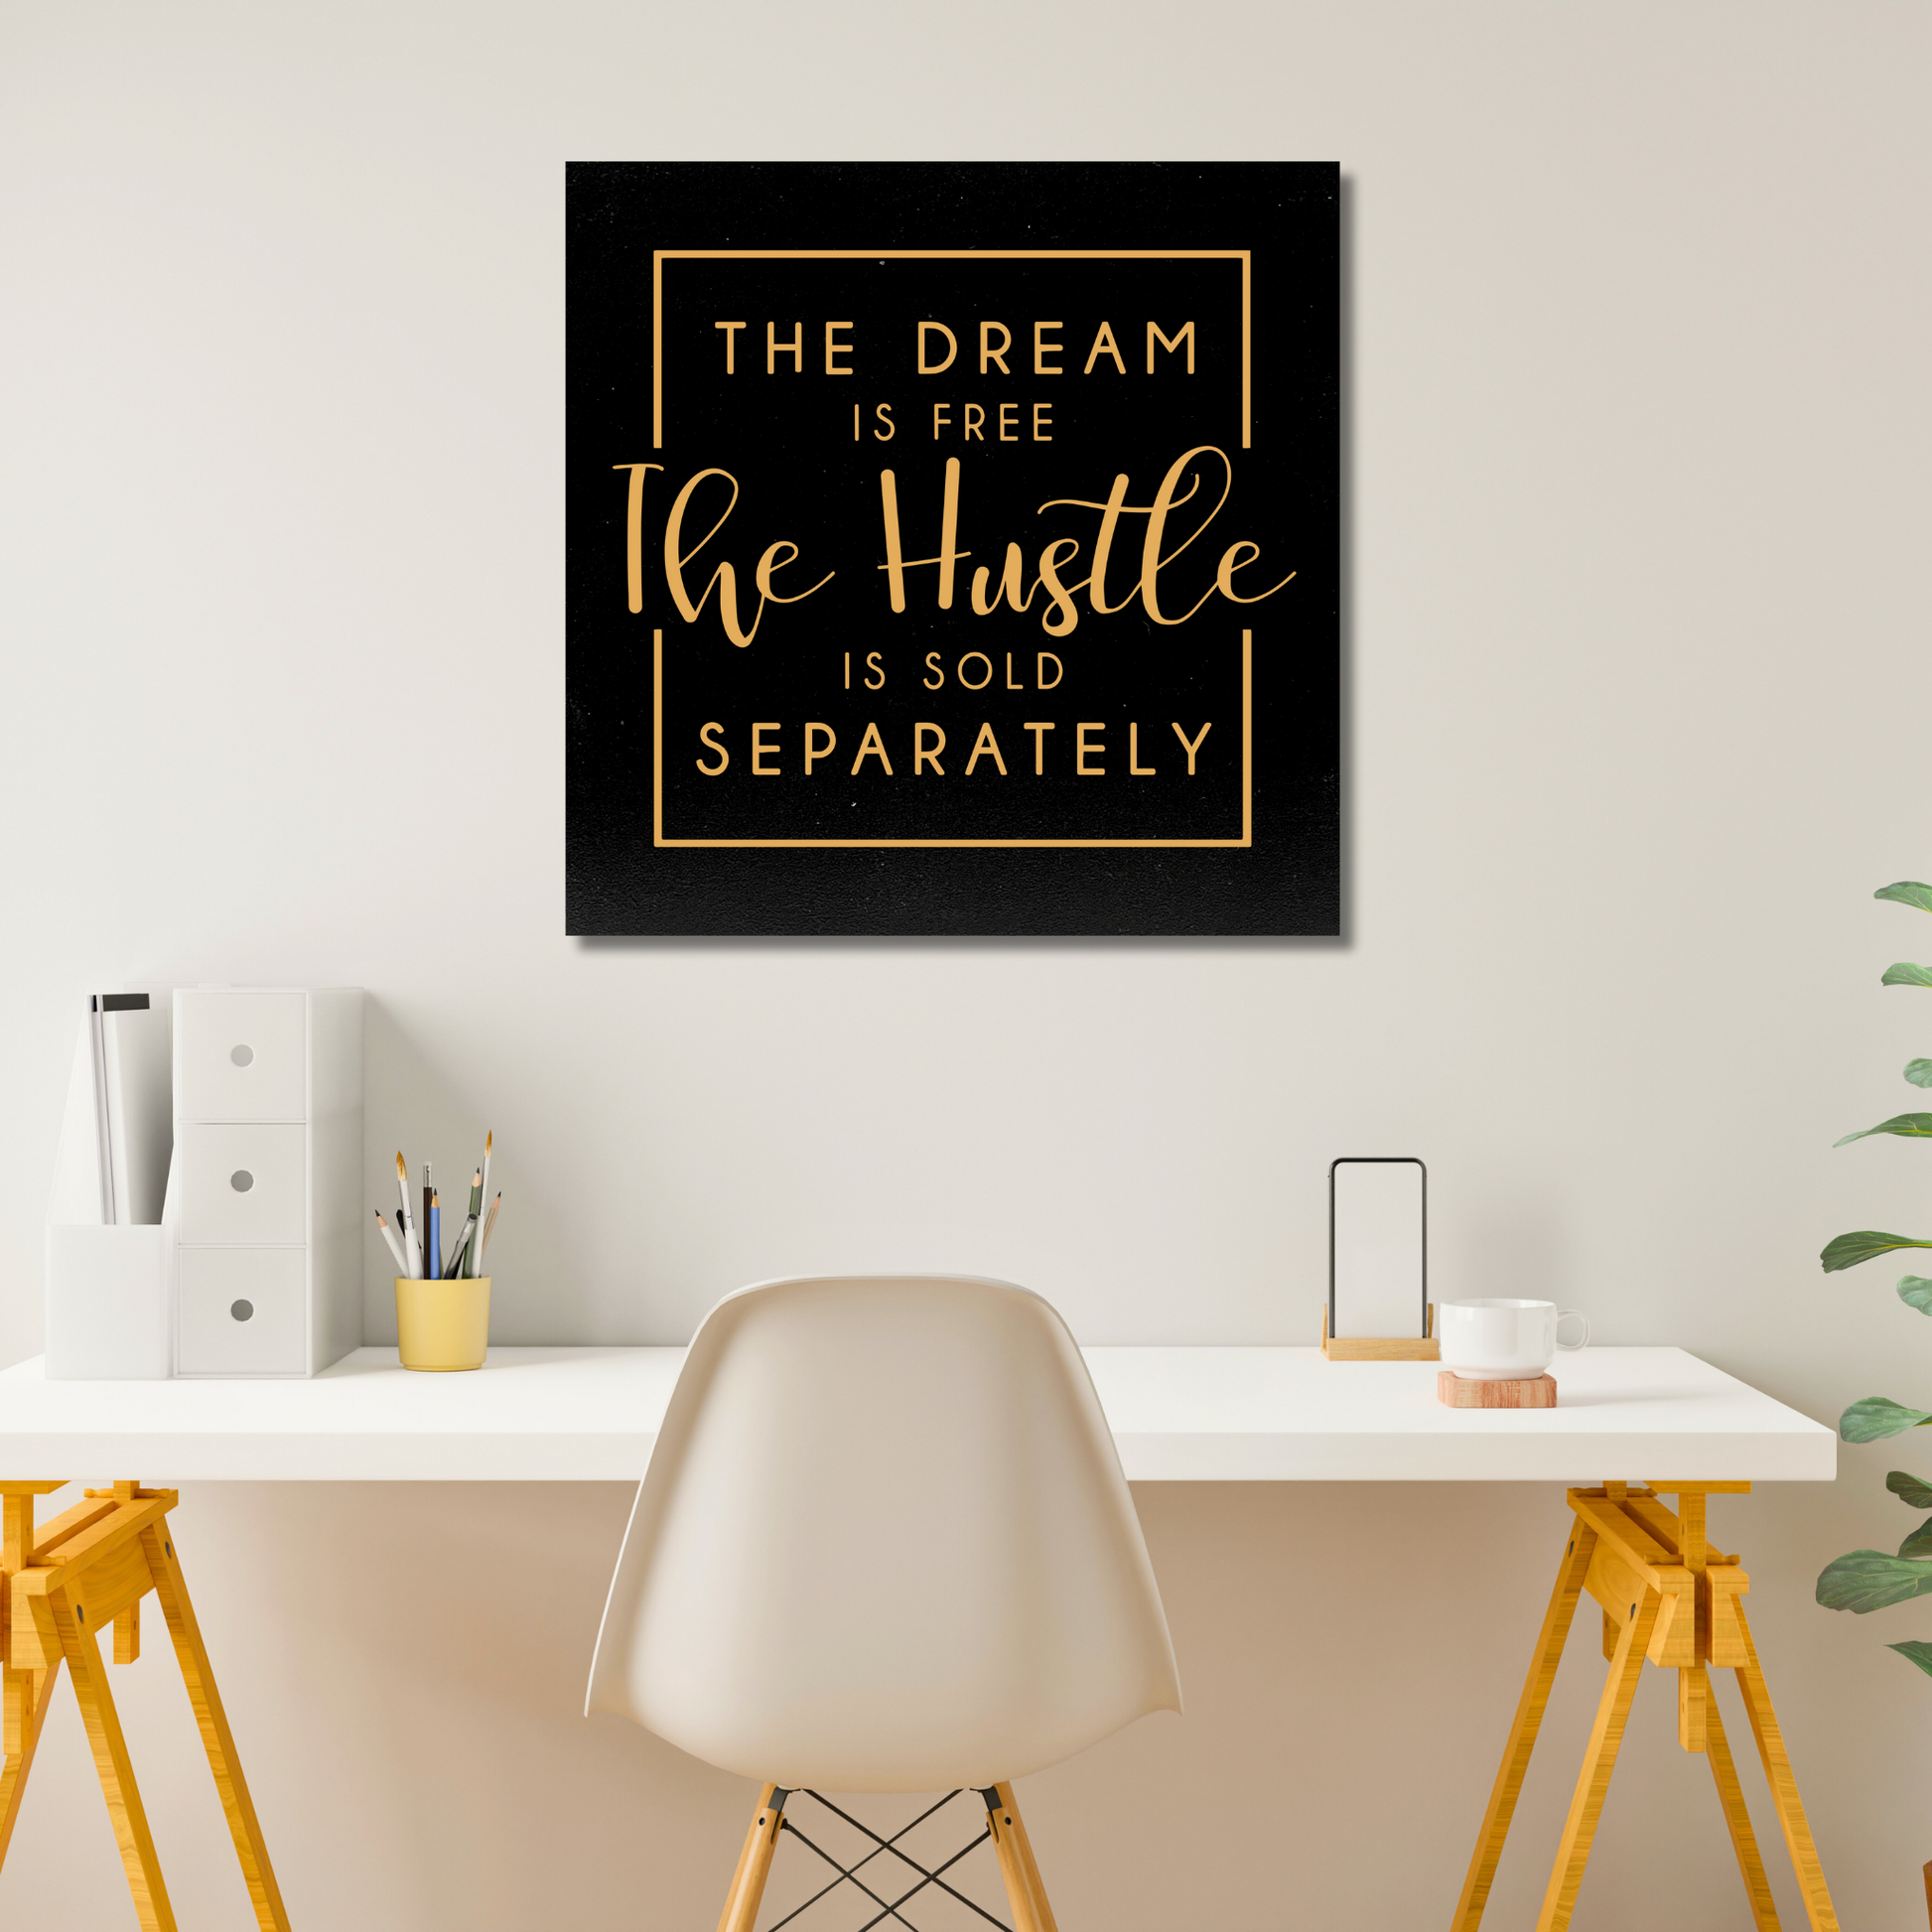 The Dream is Free The Hustle is Sold Separately Inspirational Quote